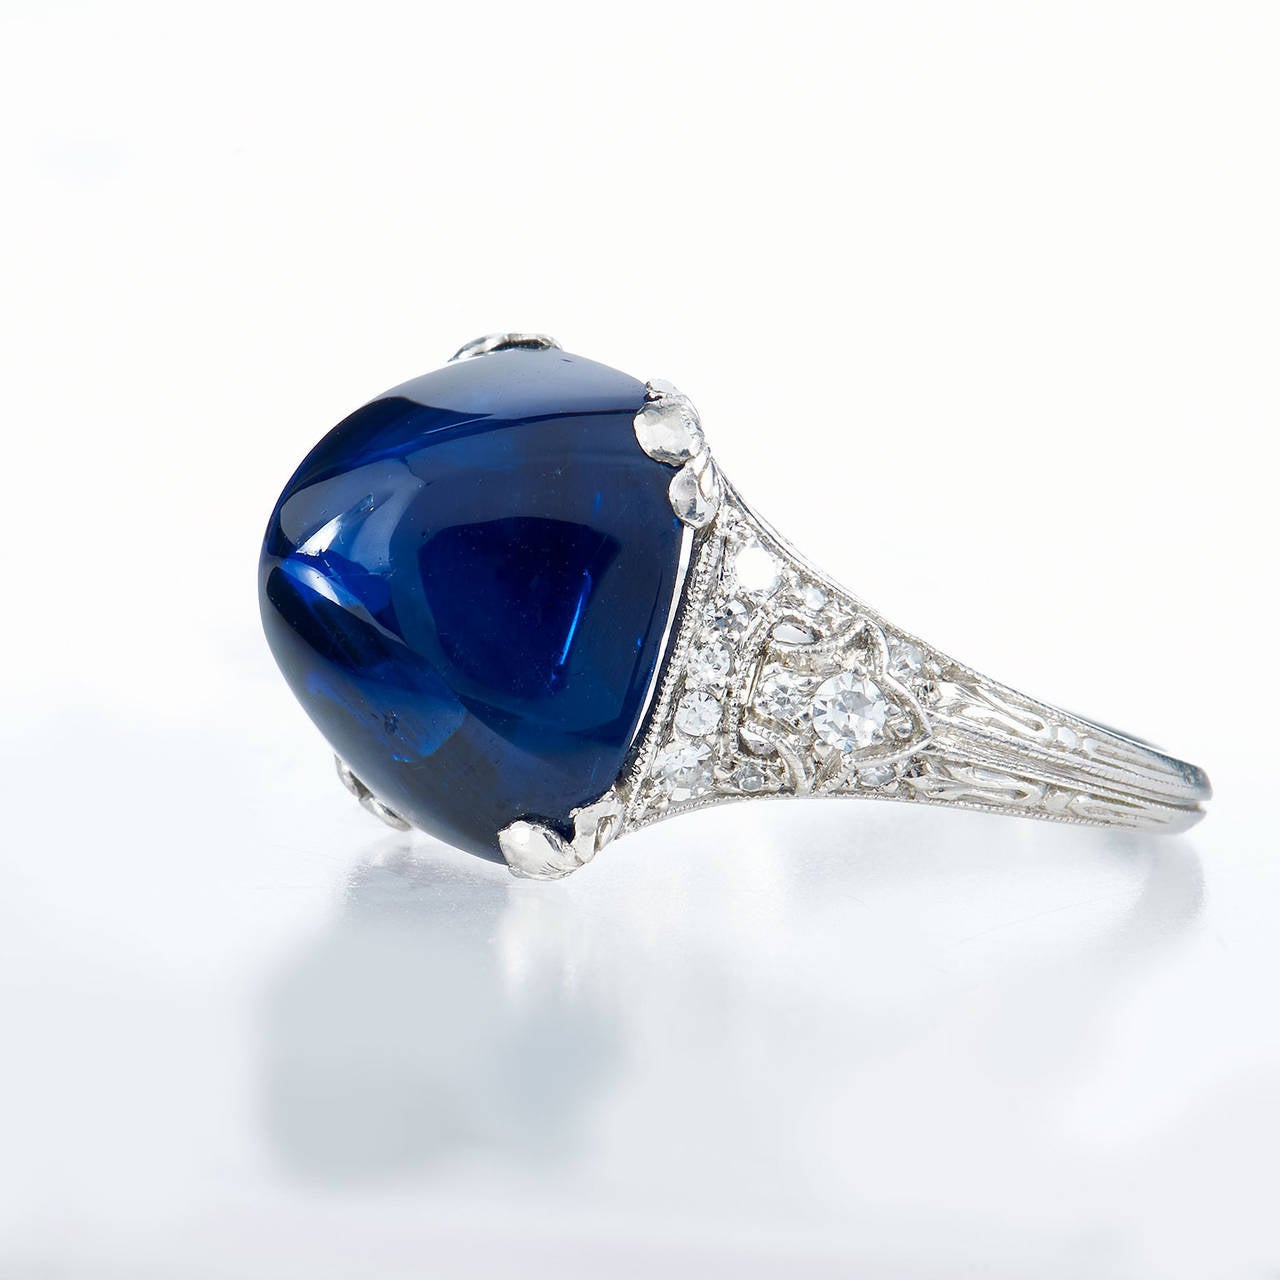 This classic Art Deco ring features a mesmerizing 11.92 carat sugarloaf single cabochon-cut blue sapphire with an AGL certificate stating the sapphire is Cambodian with no heat treatment. The cabochon-cut is a treasured cut that enhances the true